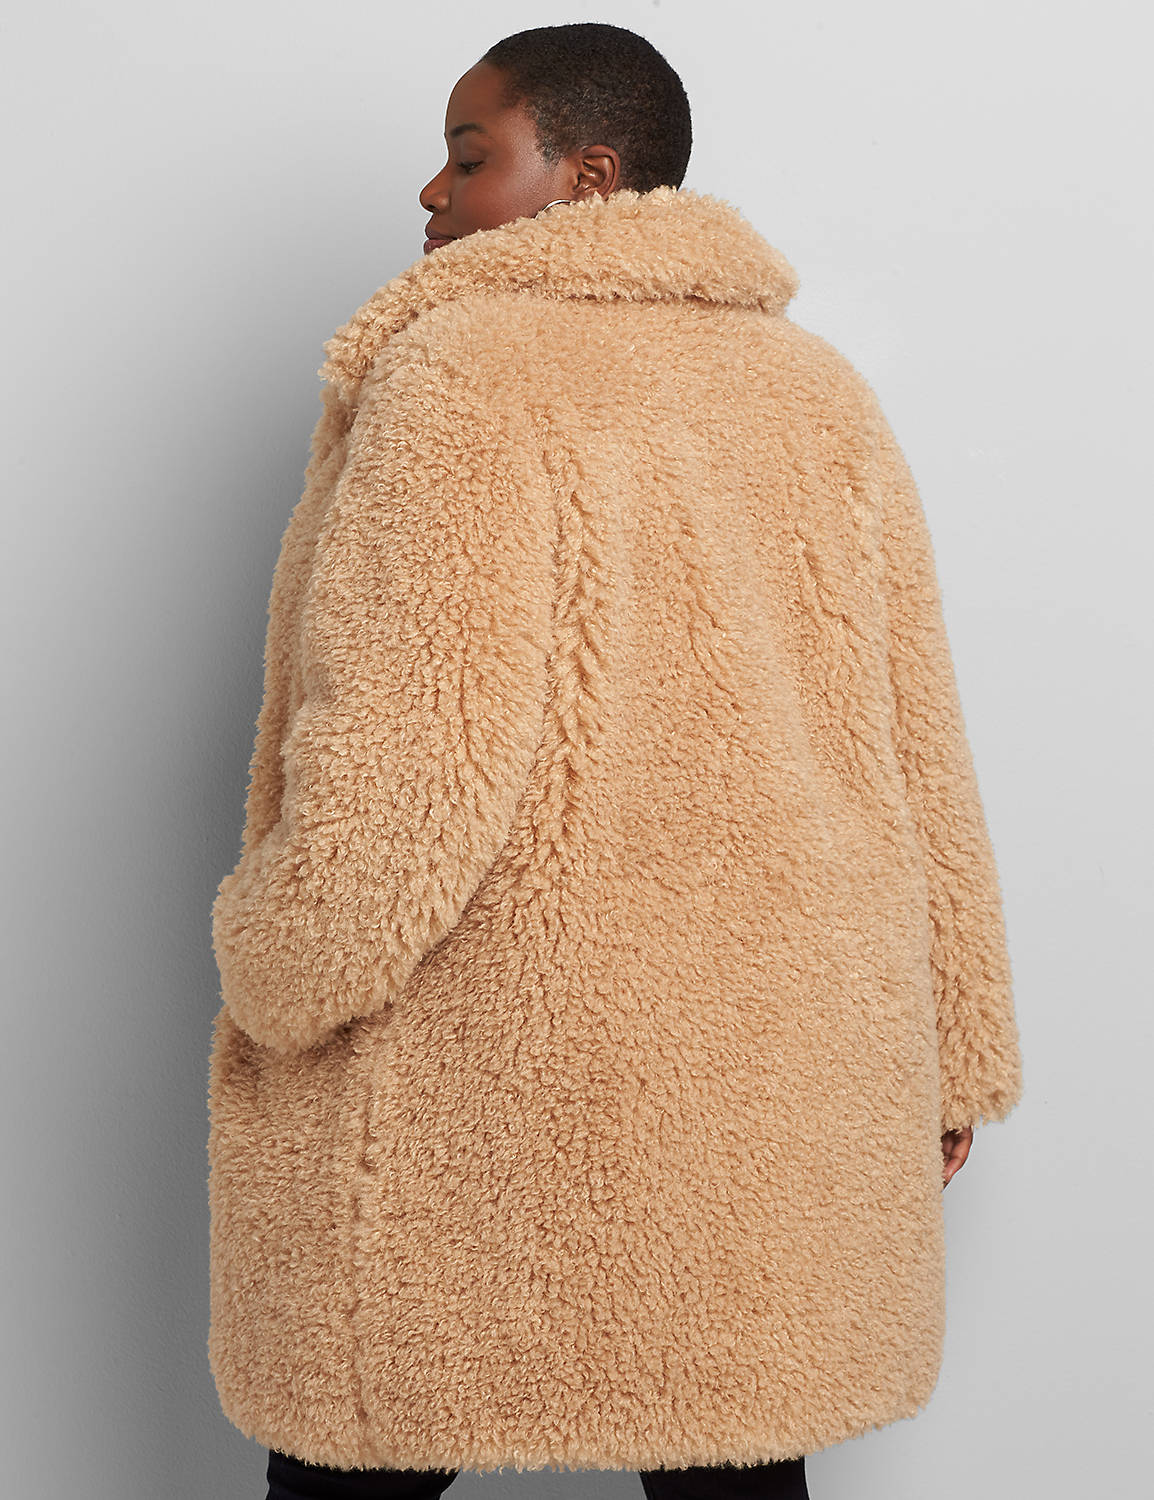 High Pile Teddy Coat 1116307:Camel as Sampled:14/16 Product Image 2